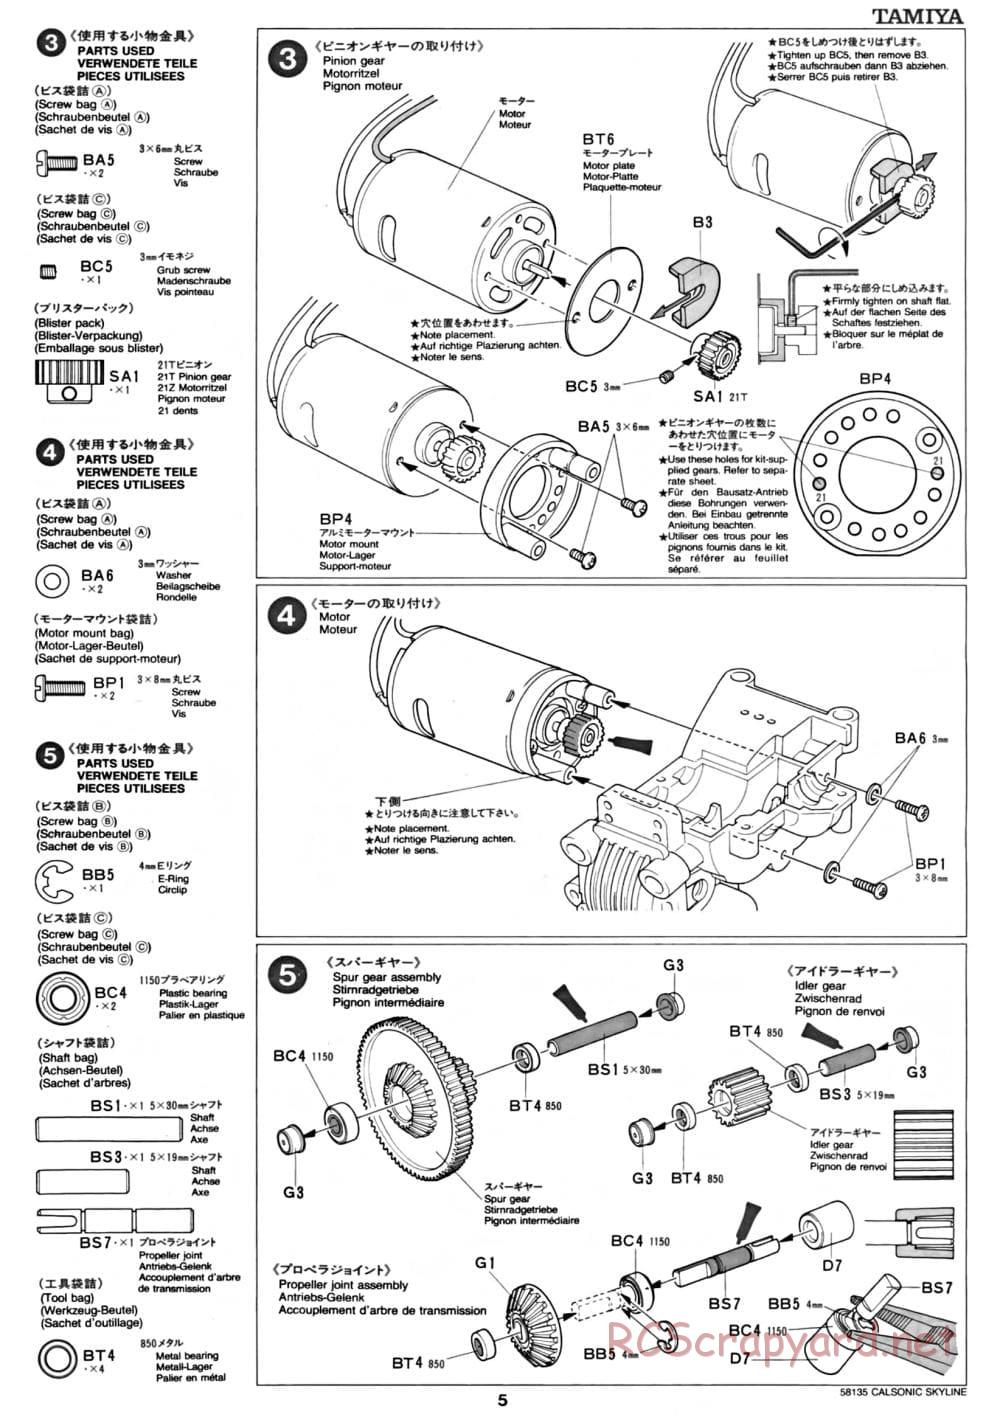 Tamiya - Calsonic Skyline GT-R Gr.A - TA-02 Chassis - Manual - Page 5